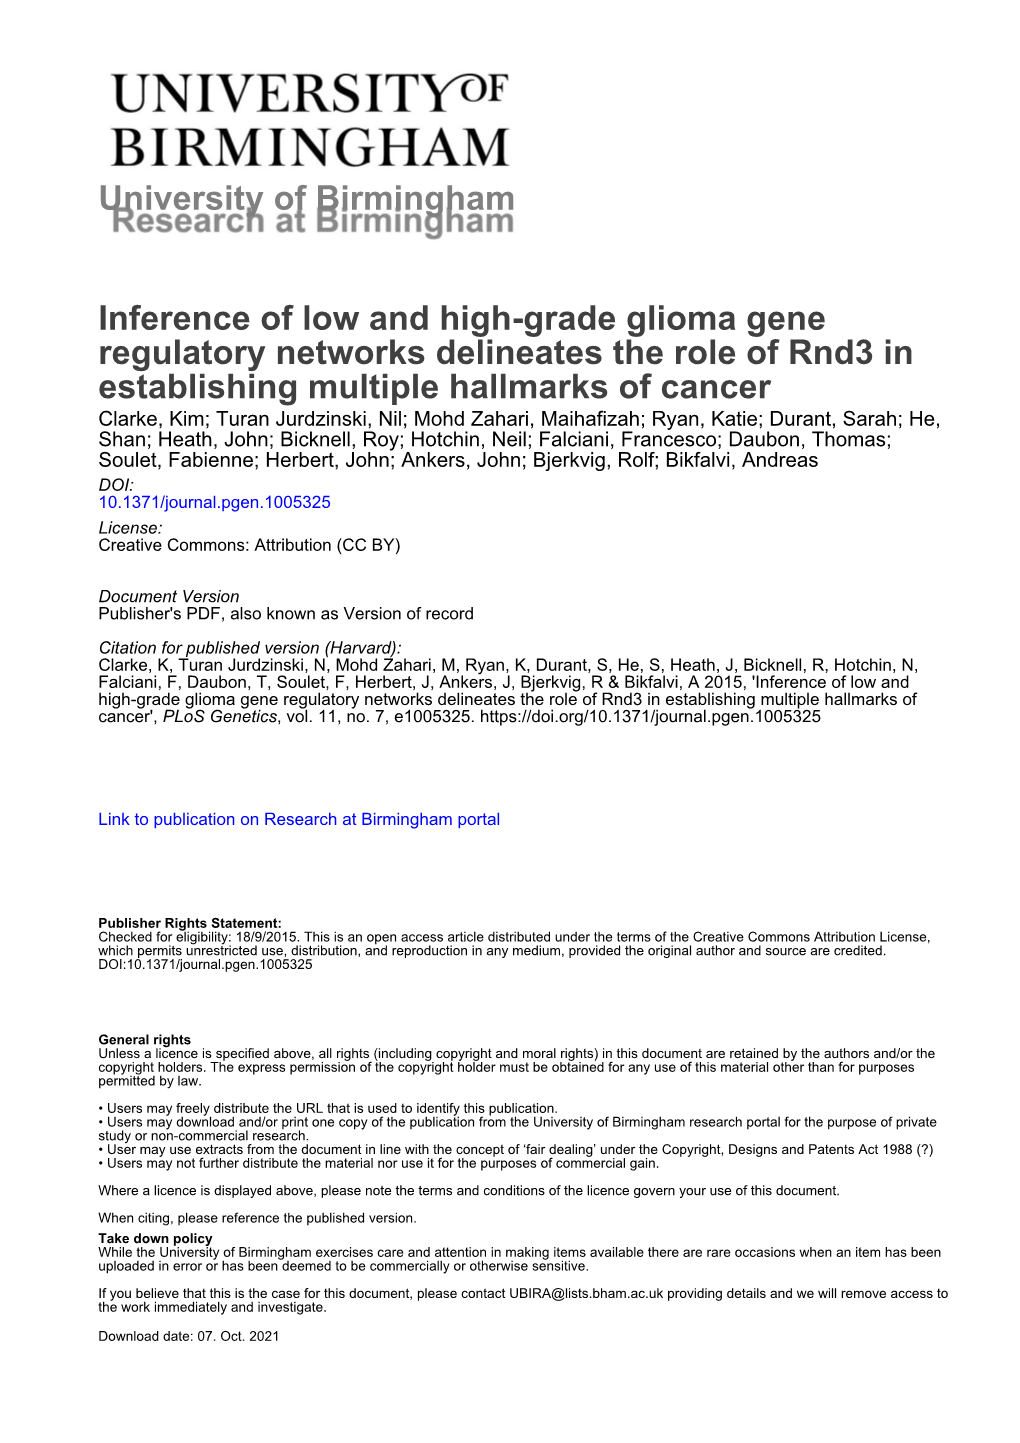 Inference of Low and High-Grade Glioma Gene